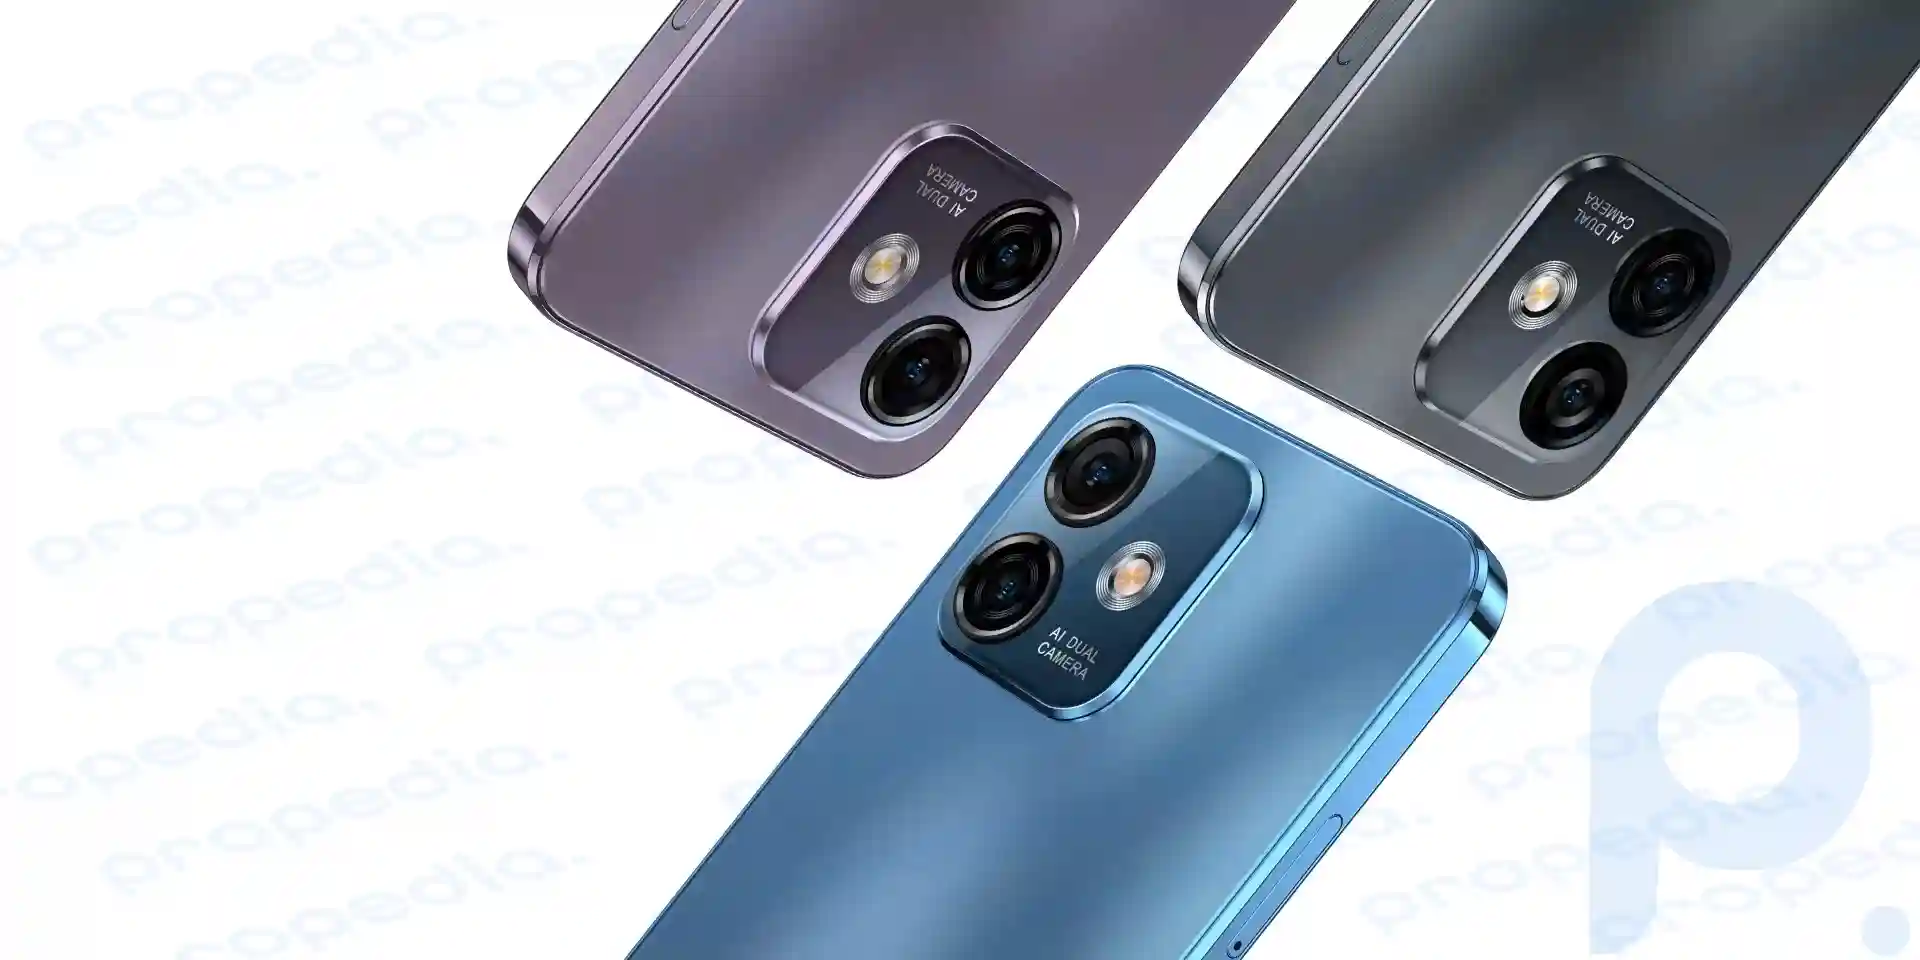 Ulefone has released a budget smartphone Note 16 Pro with moisture protection